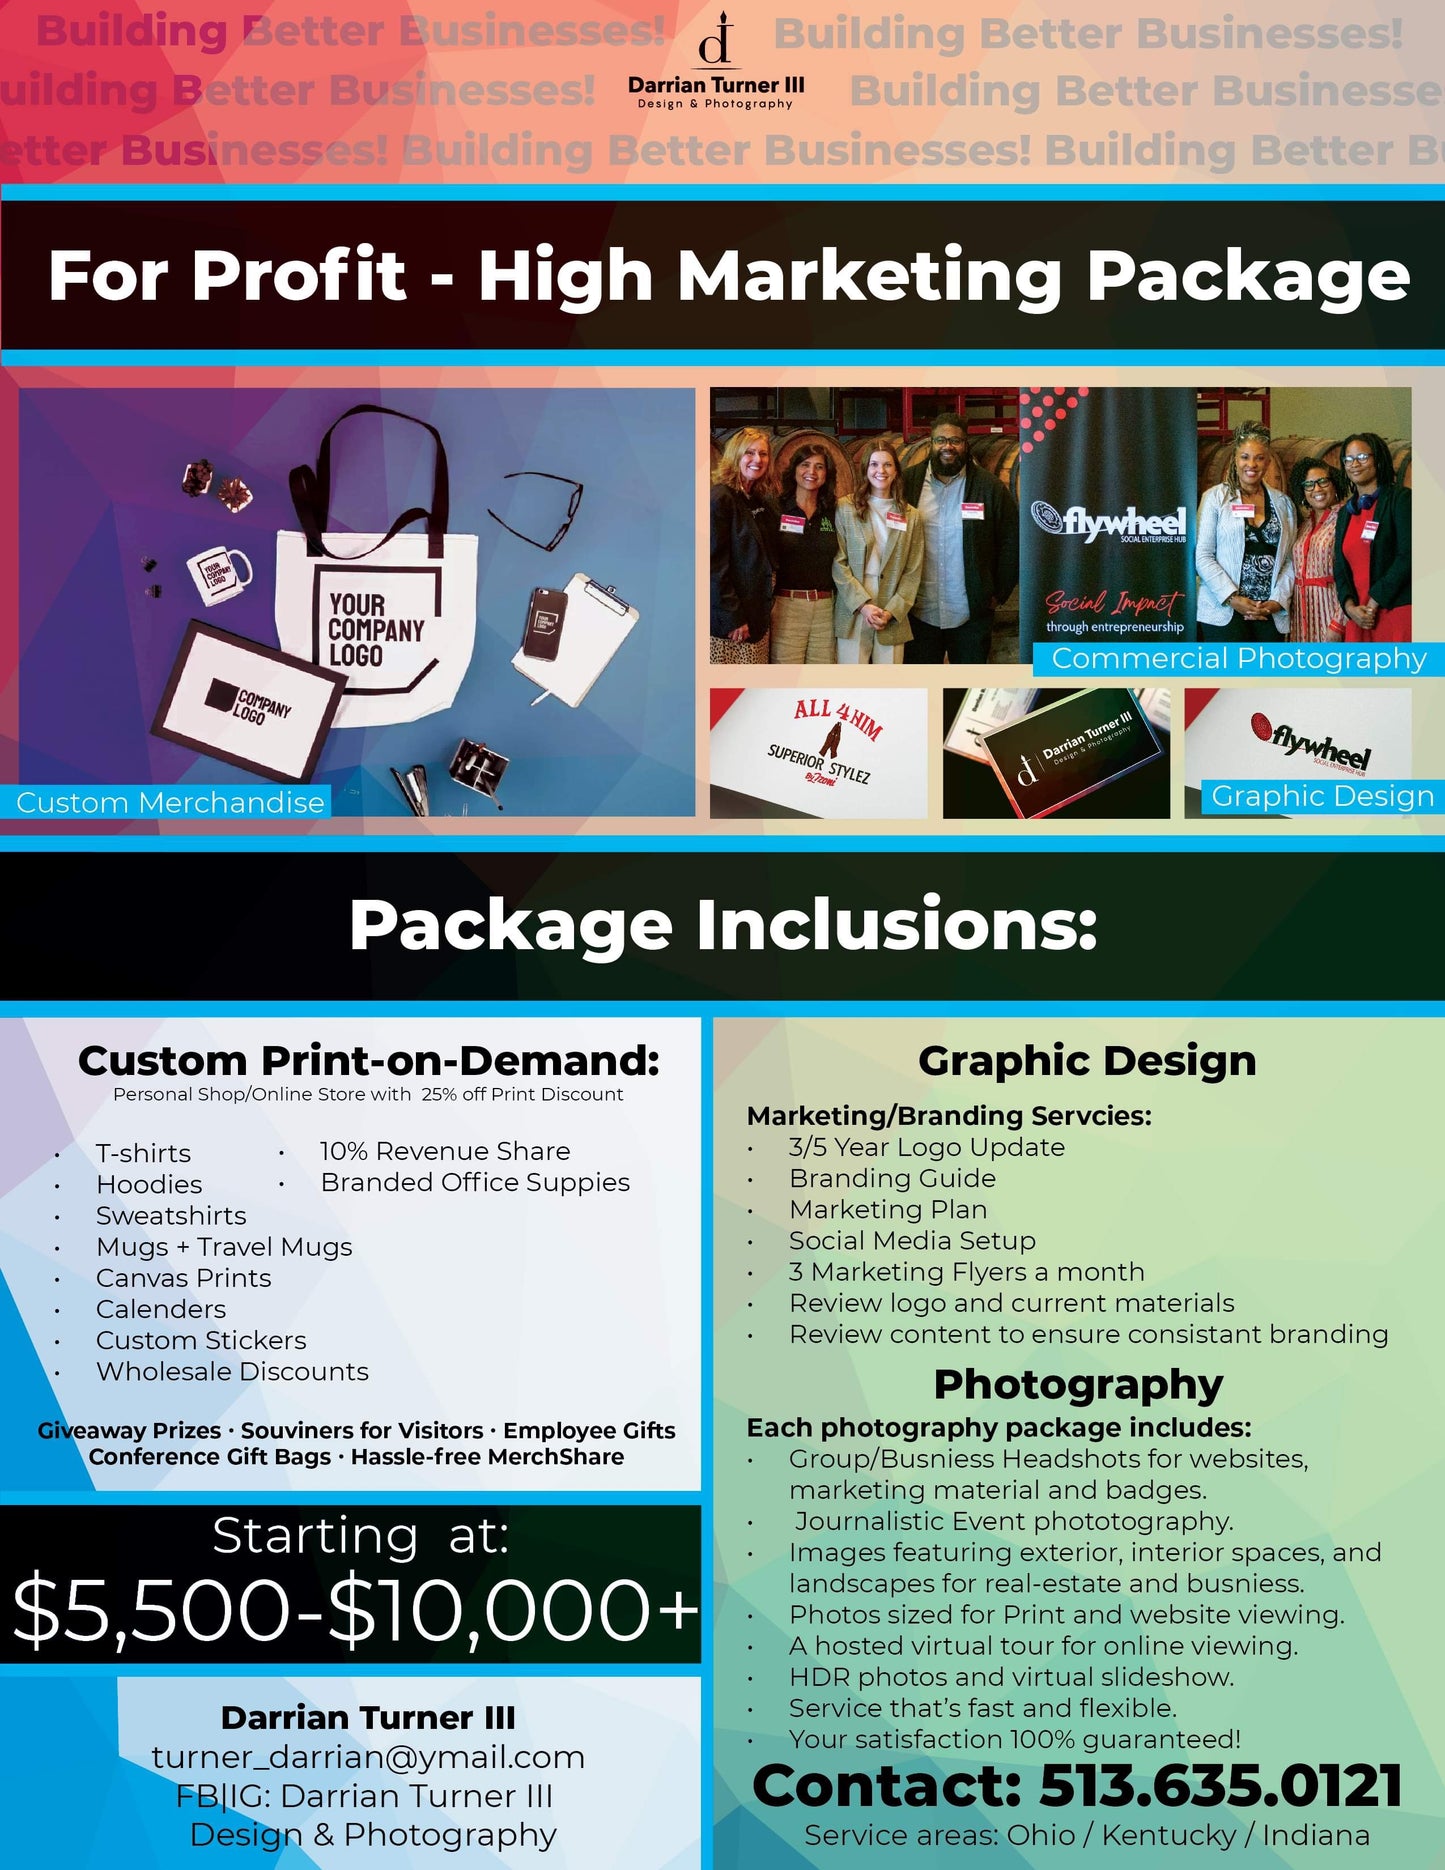 For-Profit - High Marketing Package